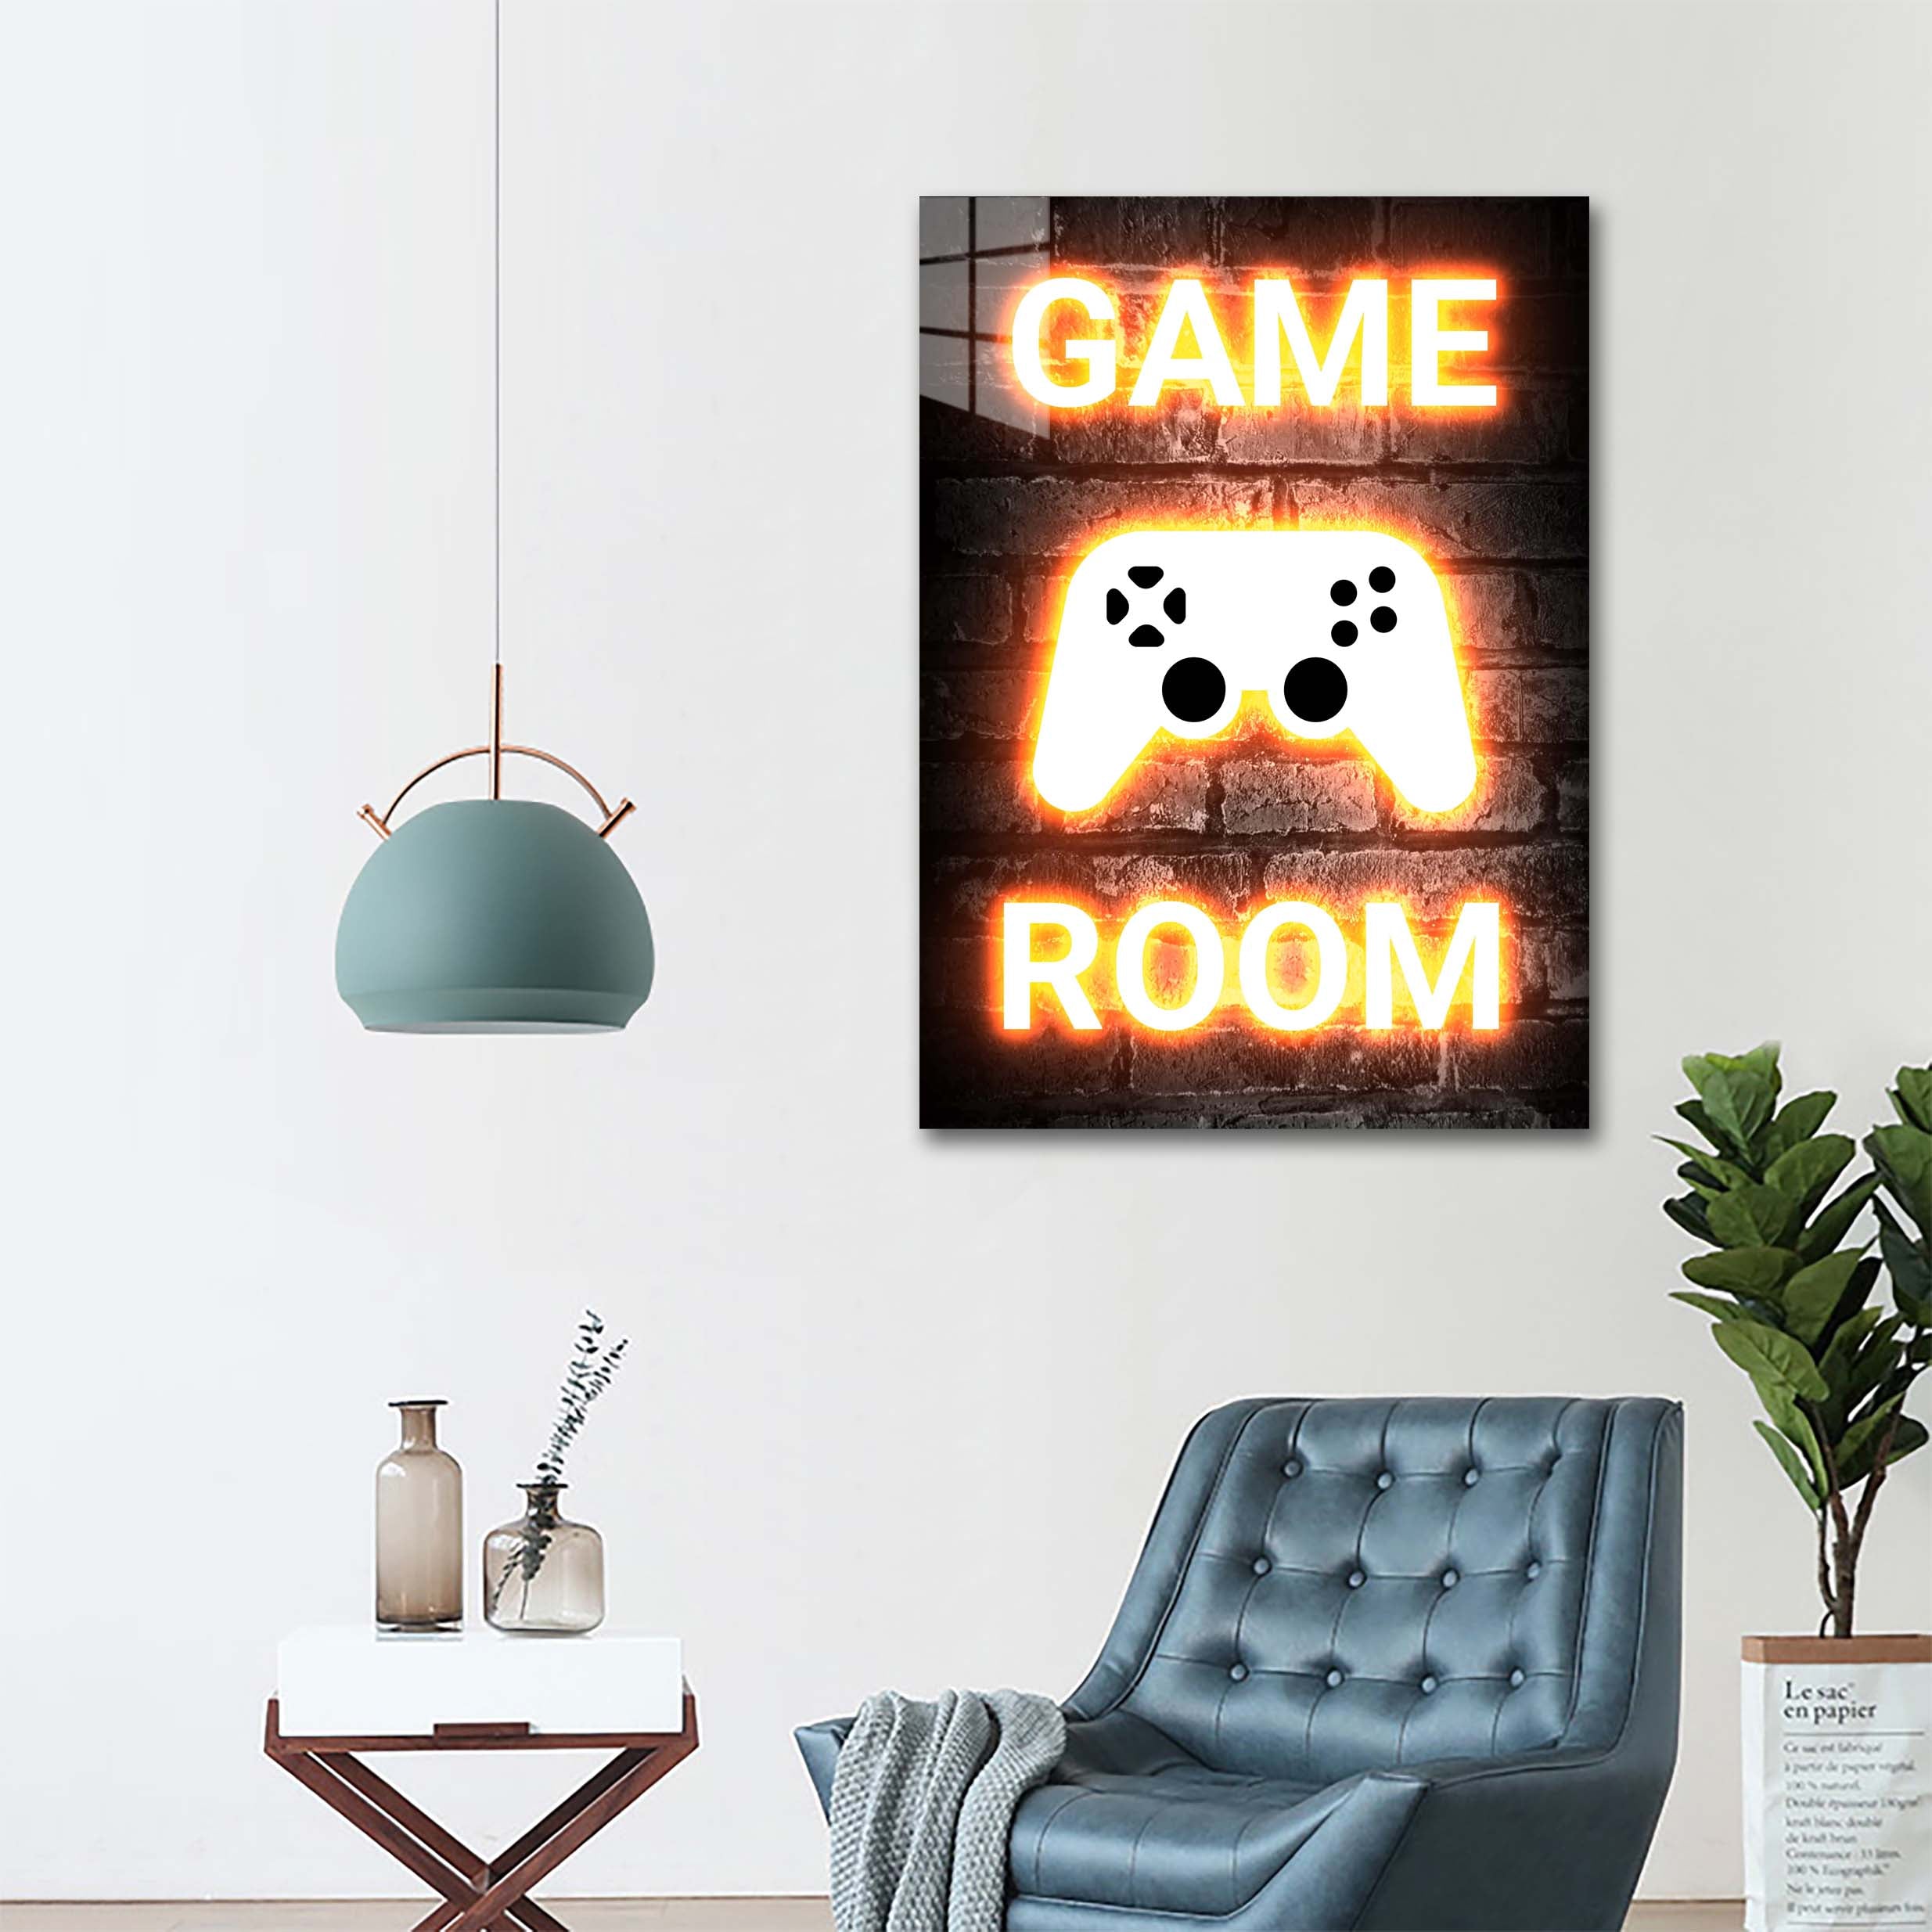 Game room-designed by @Dayo Art